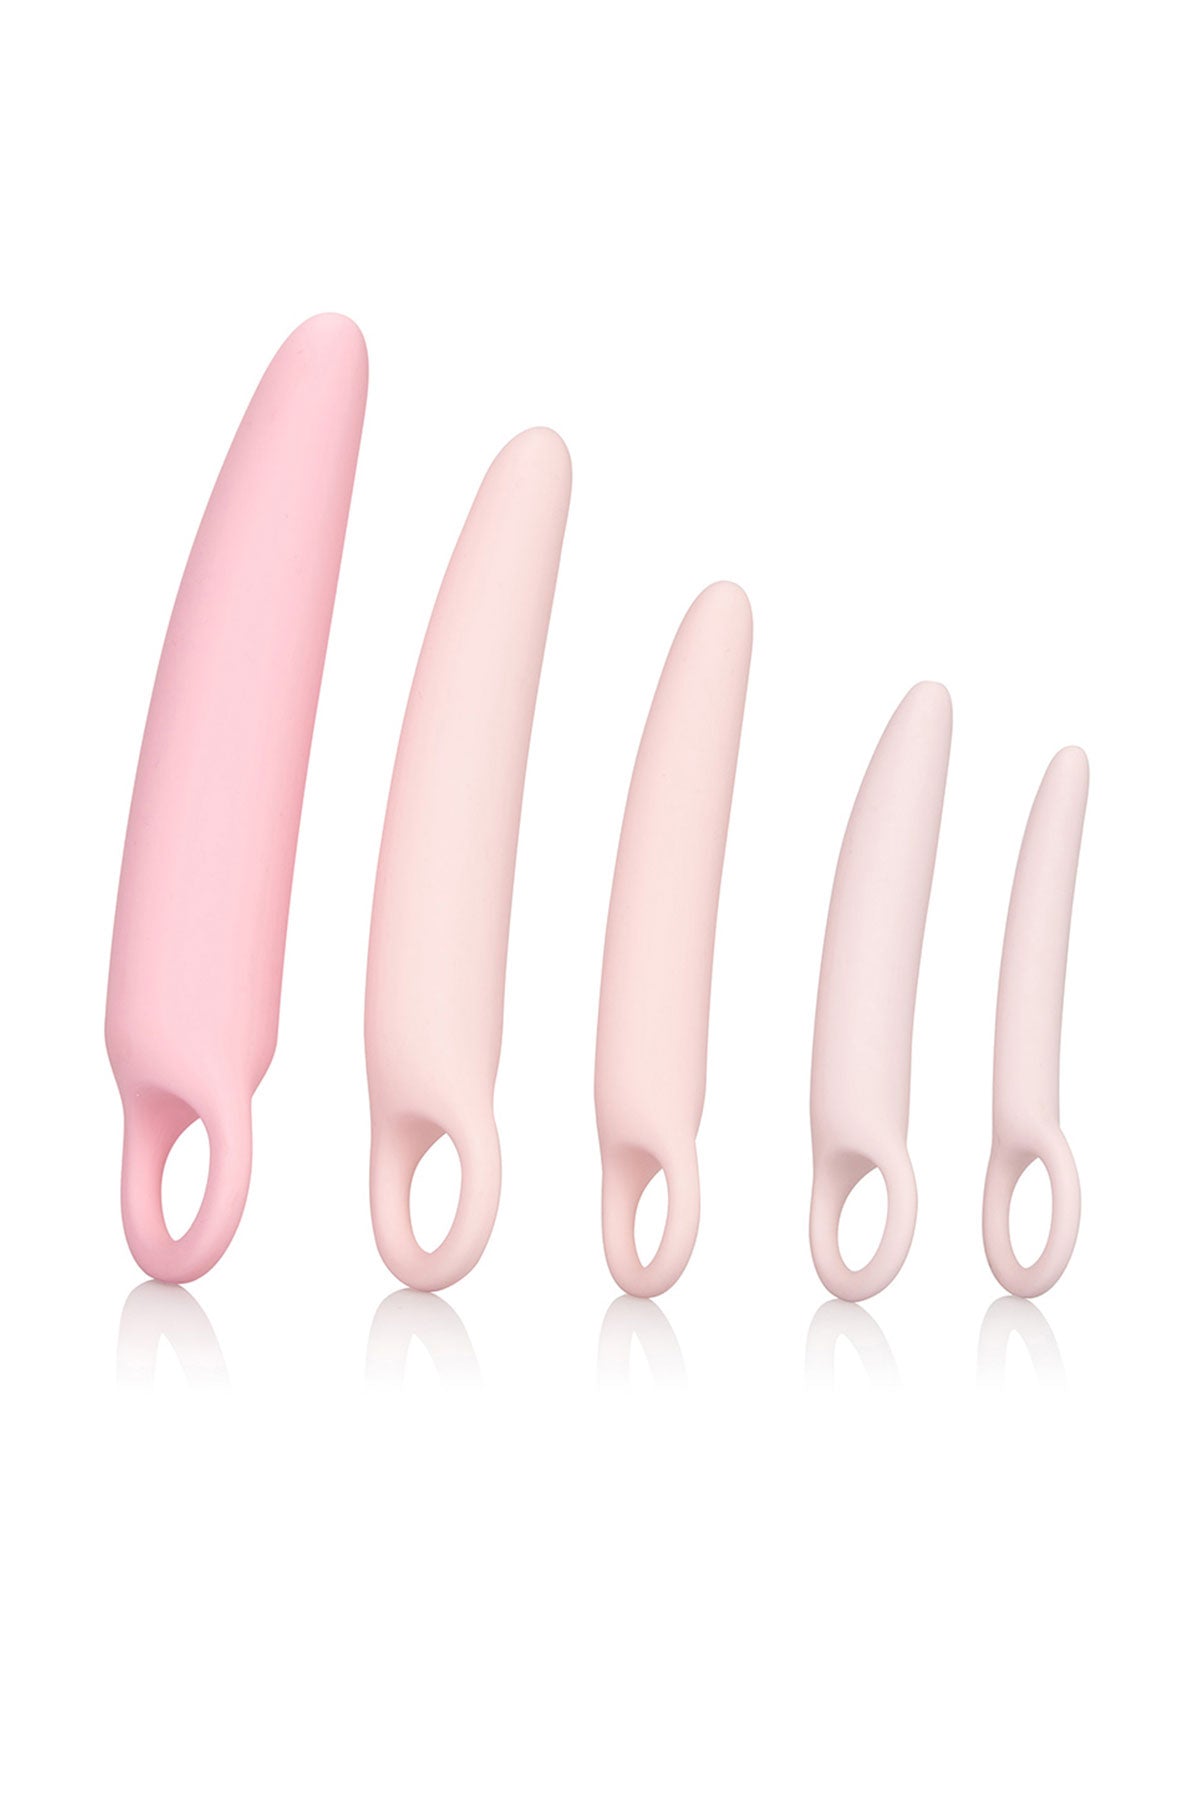 Silicone Dilator by Inspire